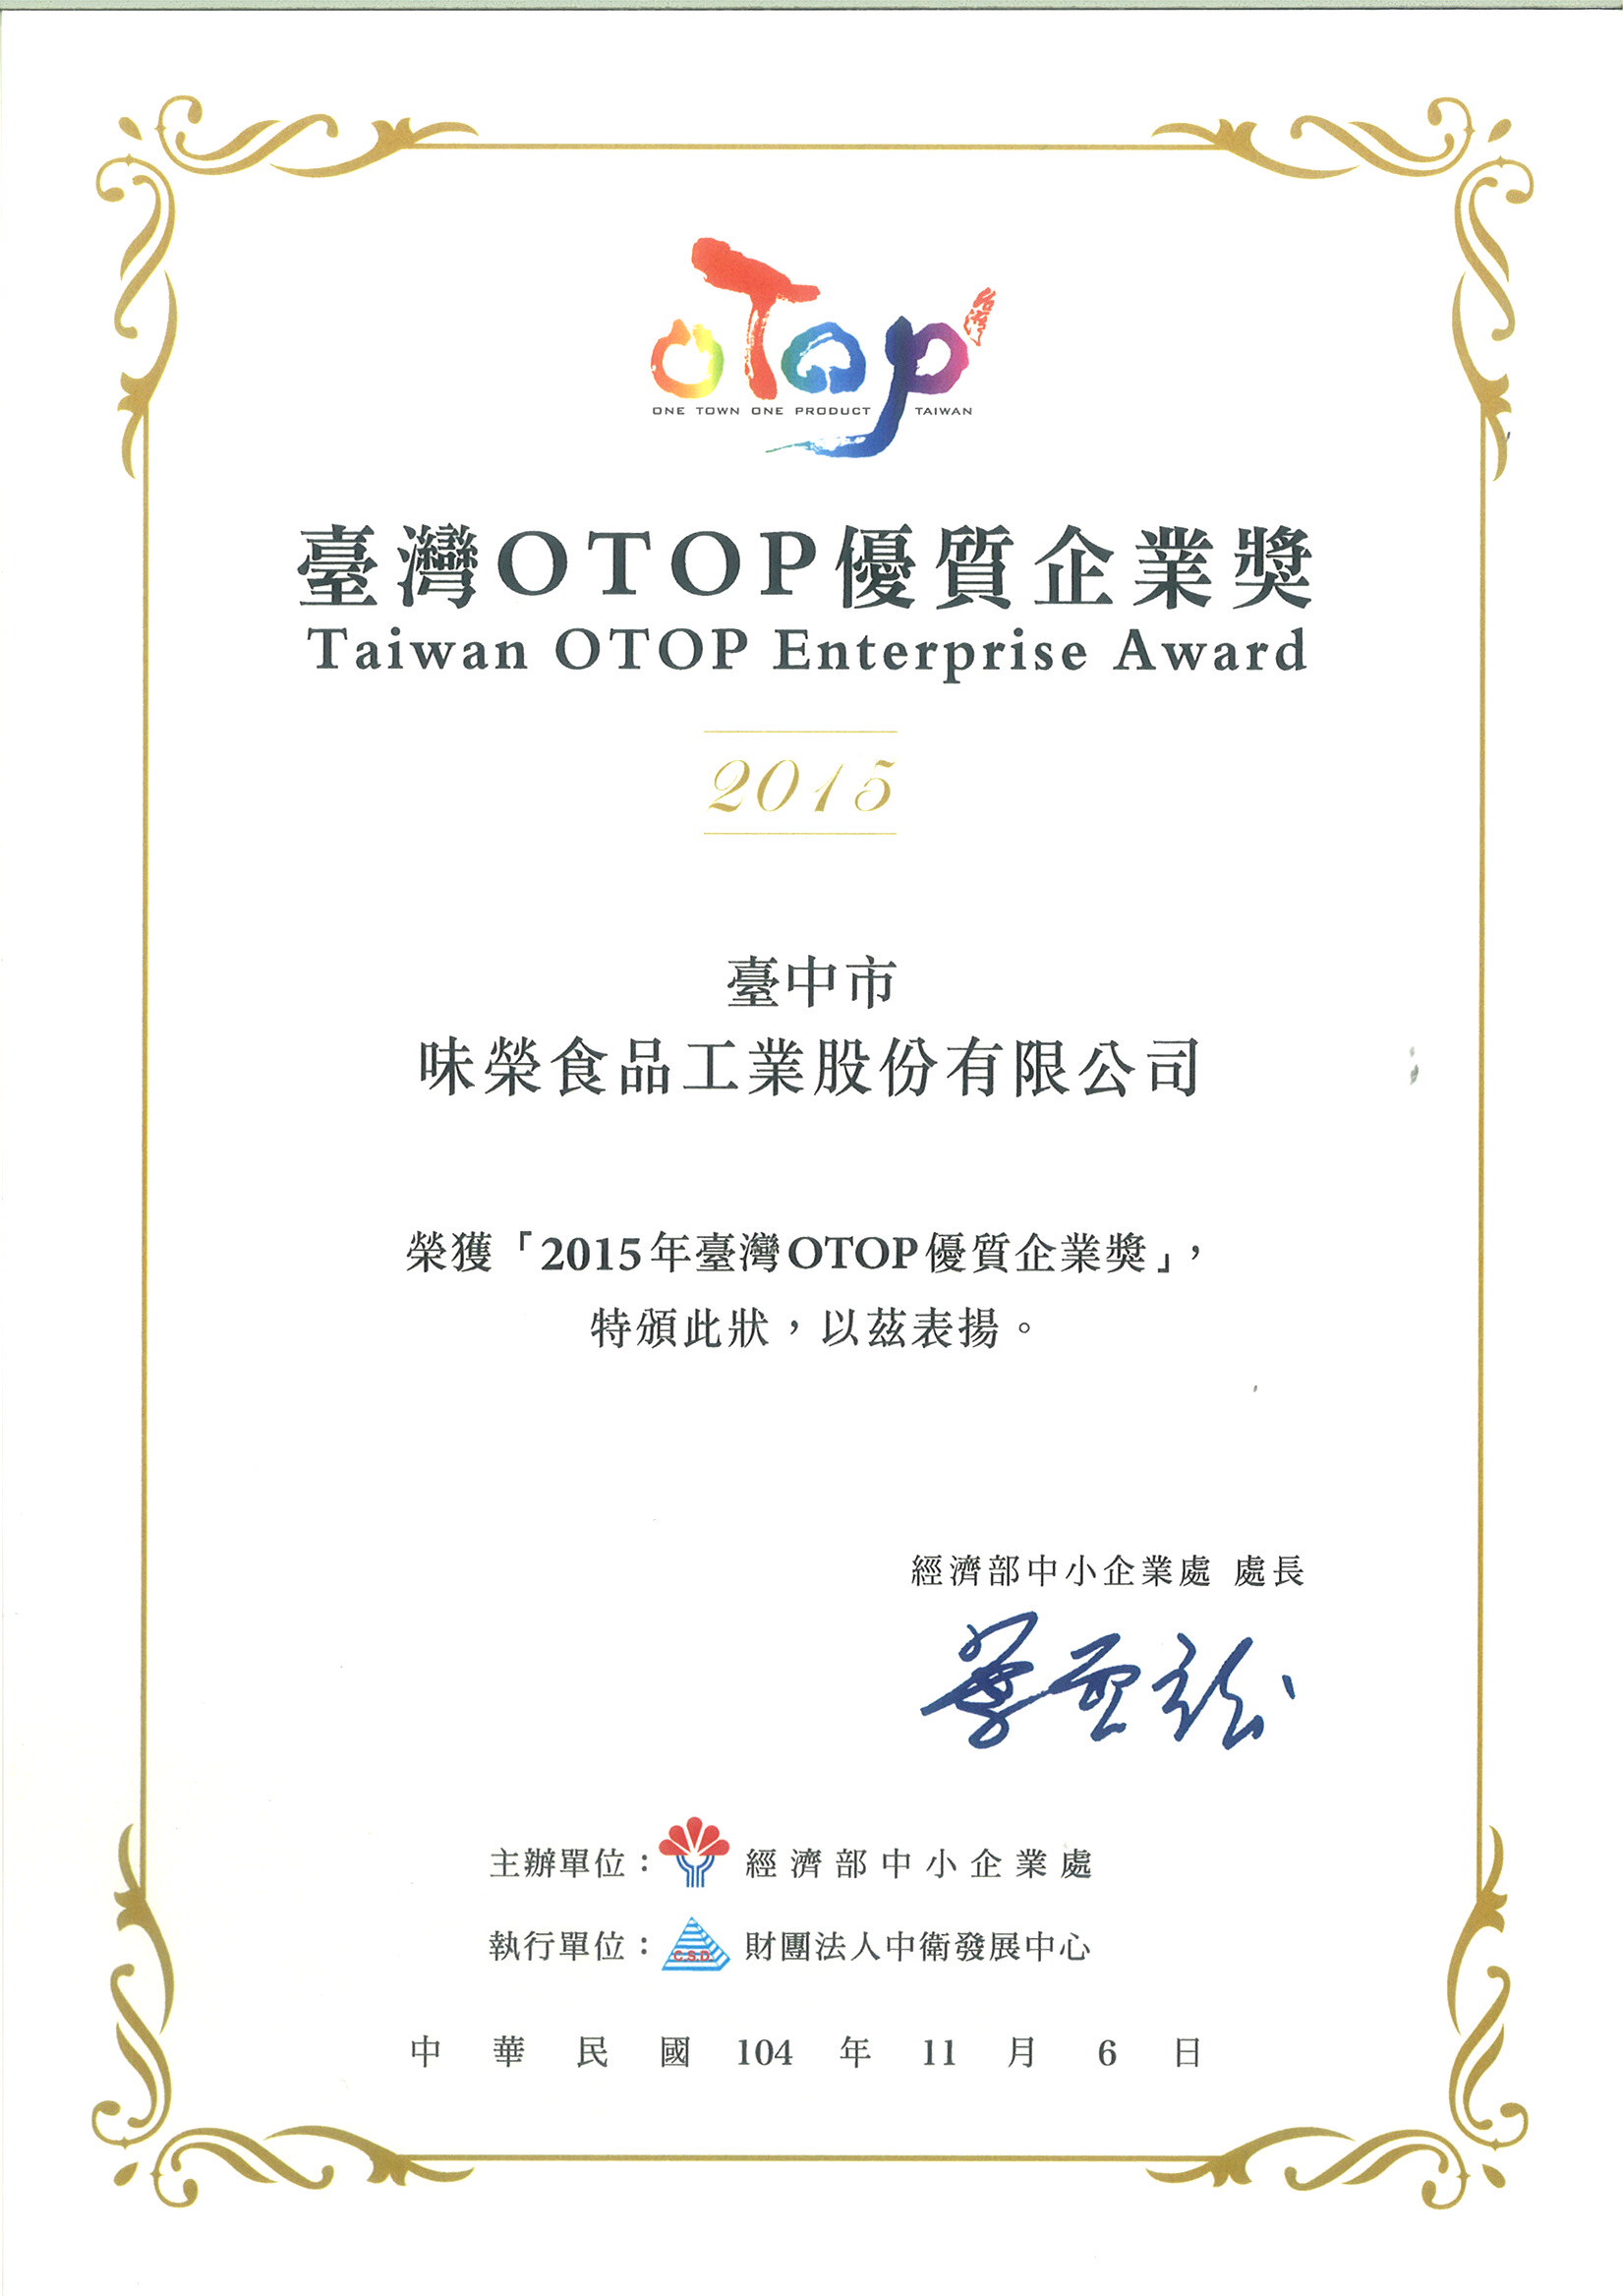 Won the "2015 Taiwan OTOP Quality Enterprise Award" from the Small and Medium Enterprises Division of the Ministry of Economic Affairs